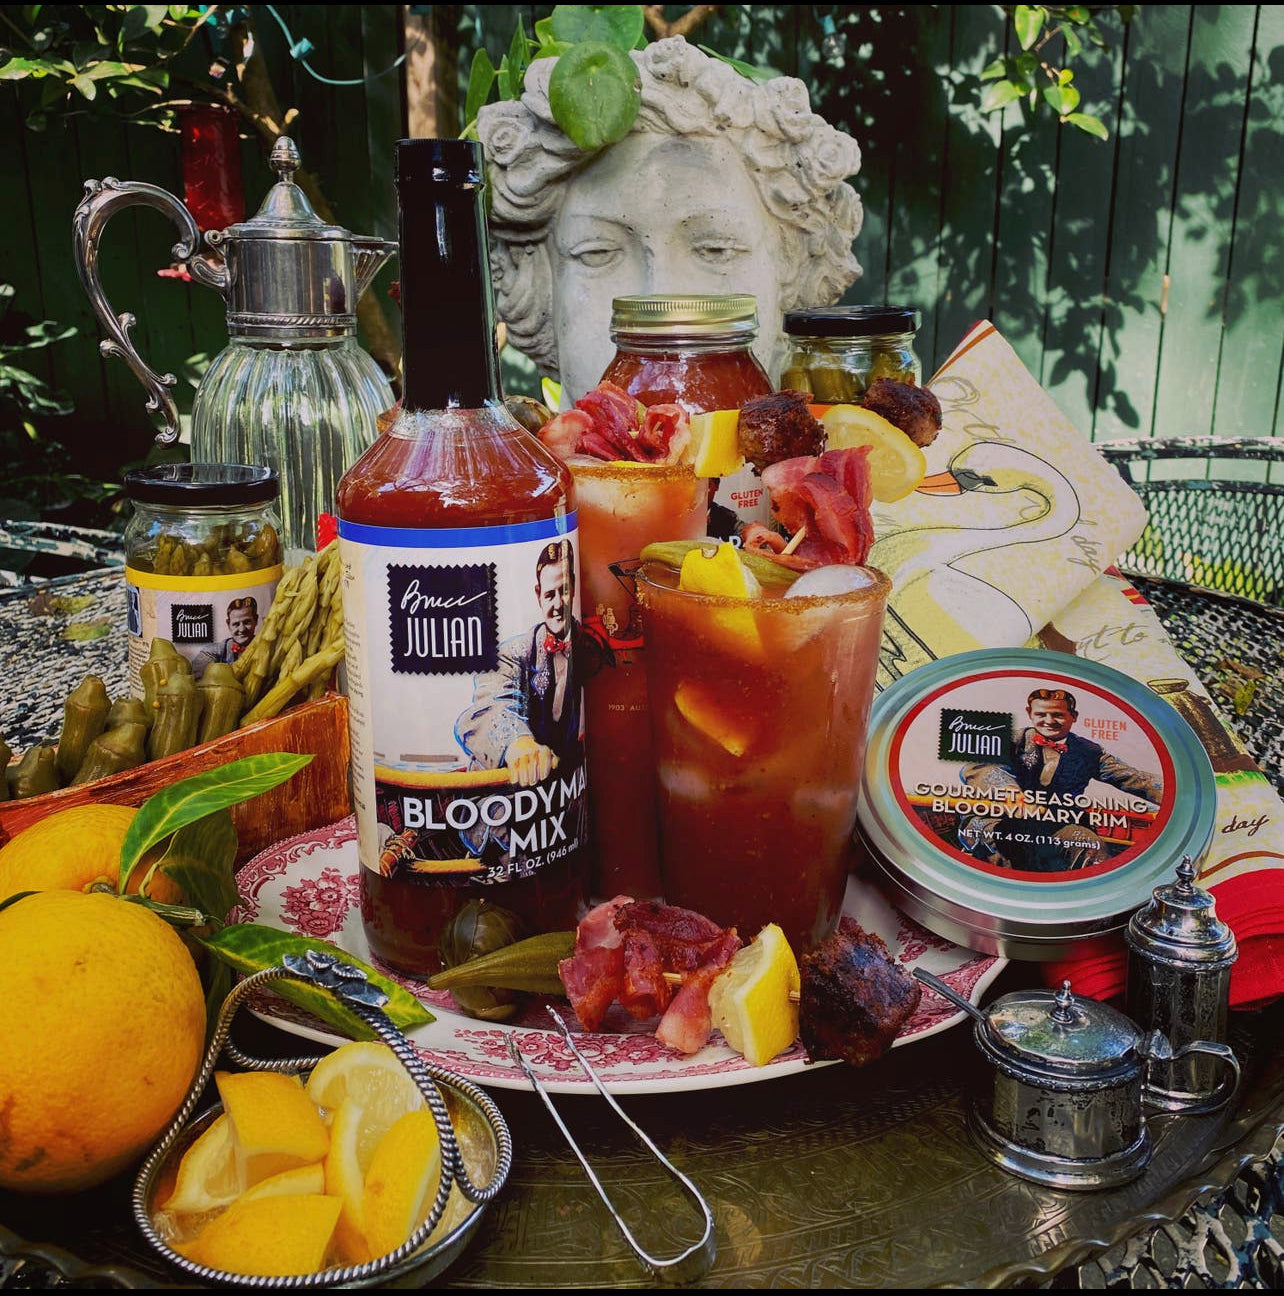 Bloody Mary mix shown with spice rimmer and cocktail garnish 